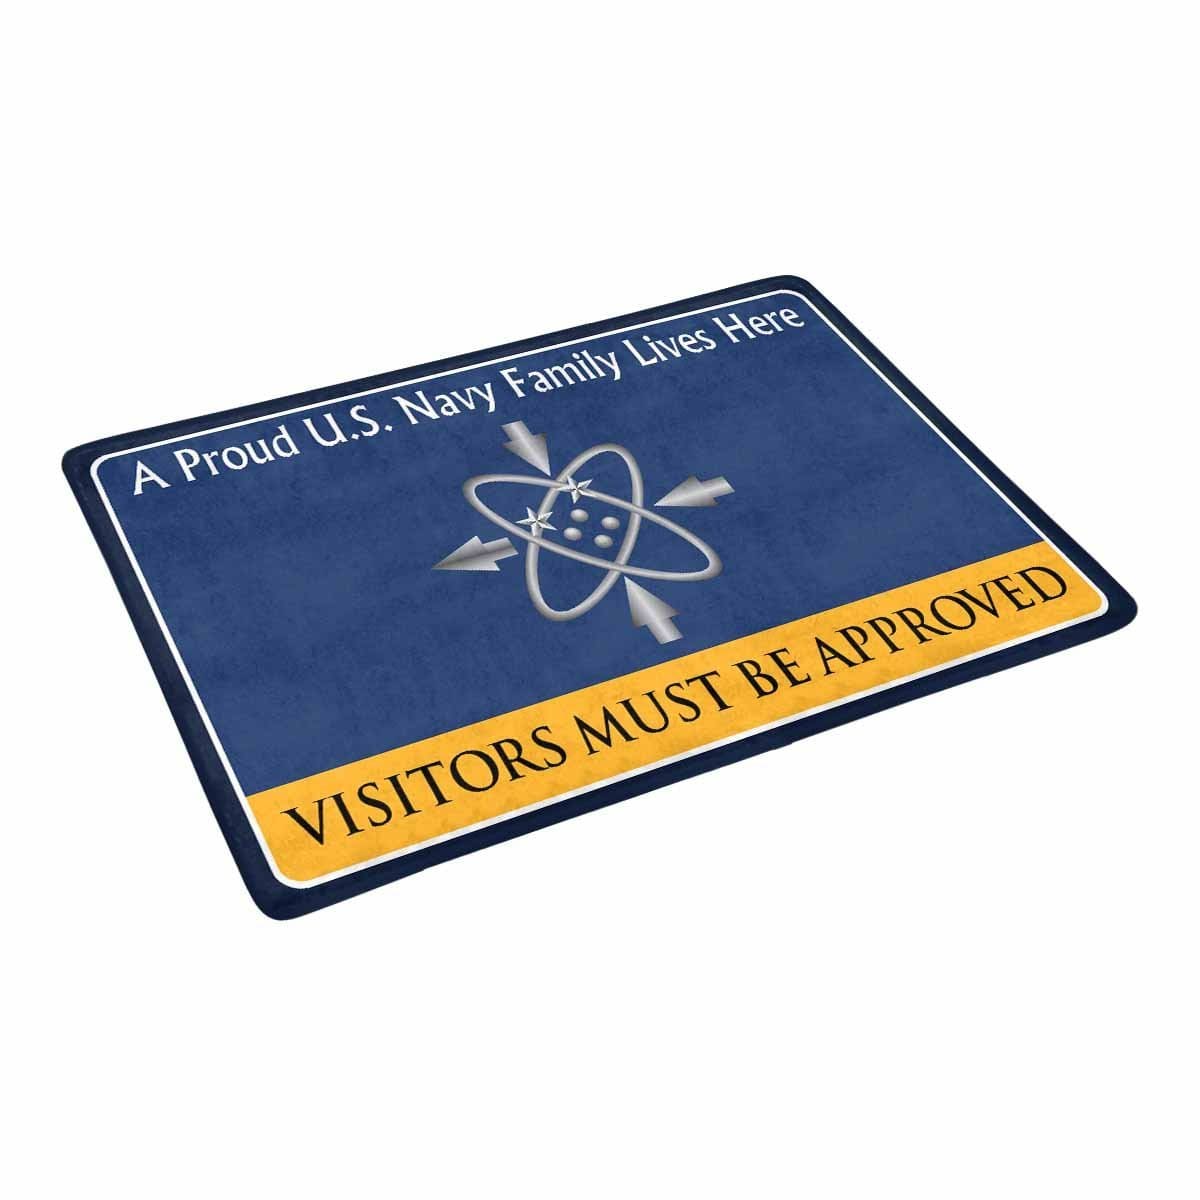 U.S Navy Data systems technician Navy DS Family Doormat - Visitors must be approved (23,6 inches x 15,7 inches)-Doormat-Navy-Rate-Veterans Nation